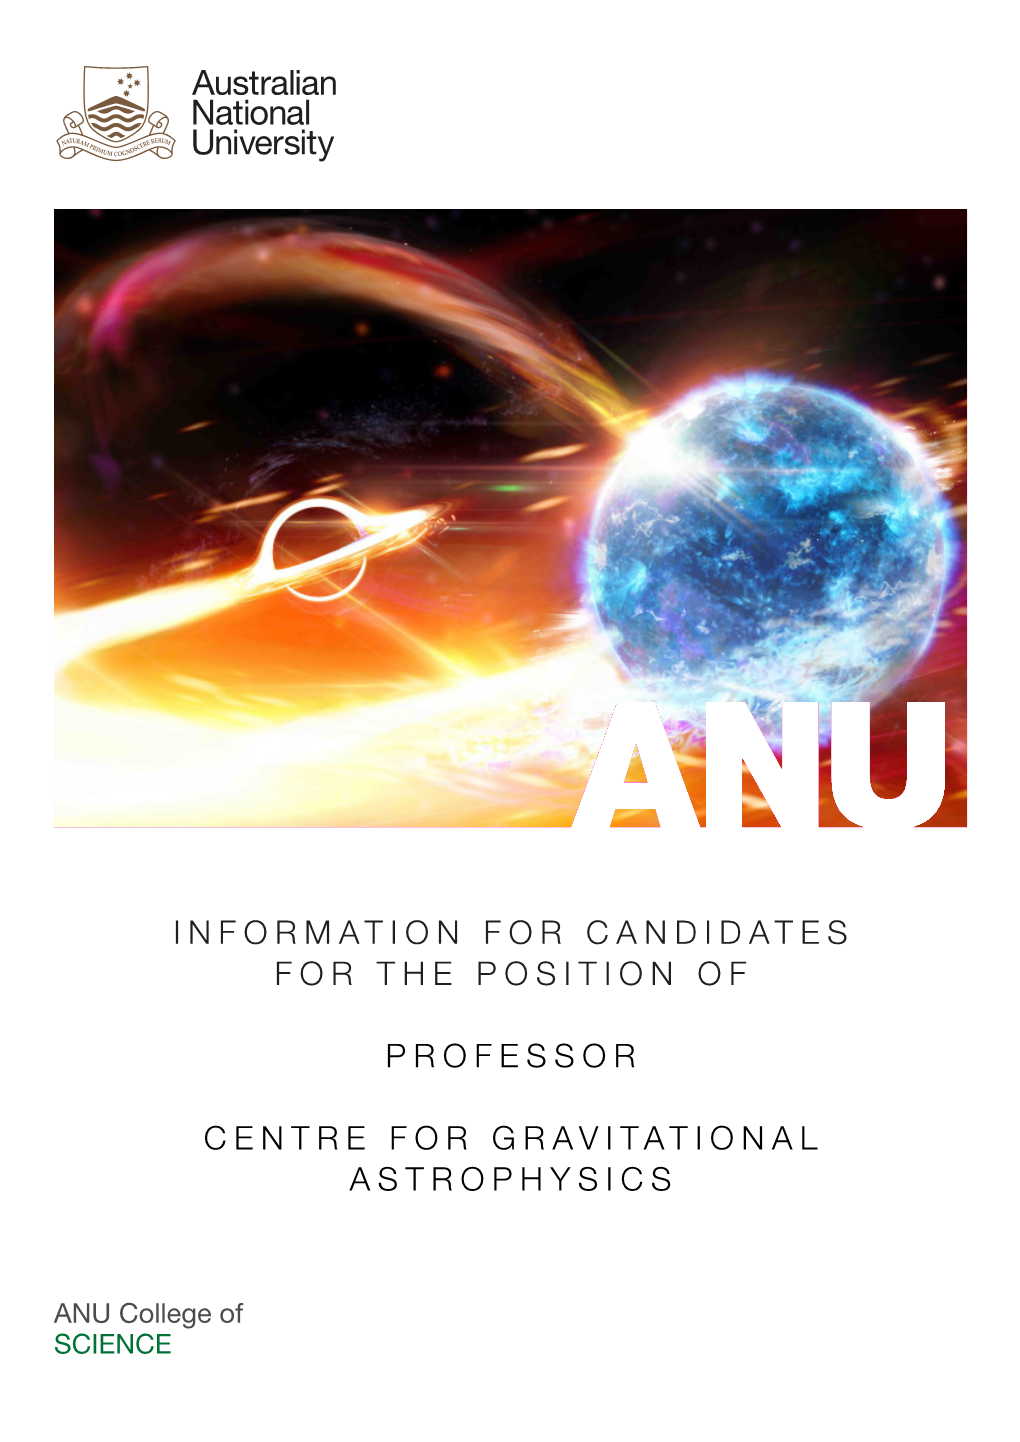 Information for Candidates for the Position of Professor Centre for Gravitational Astrophysics